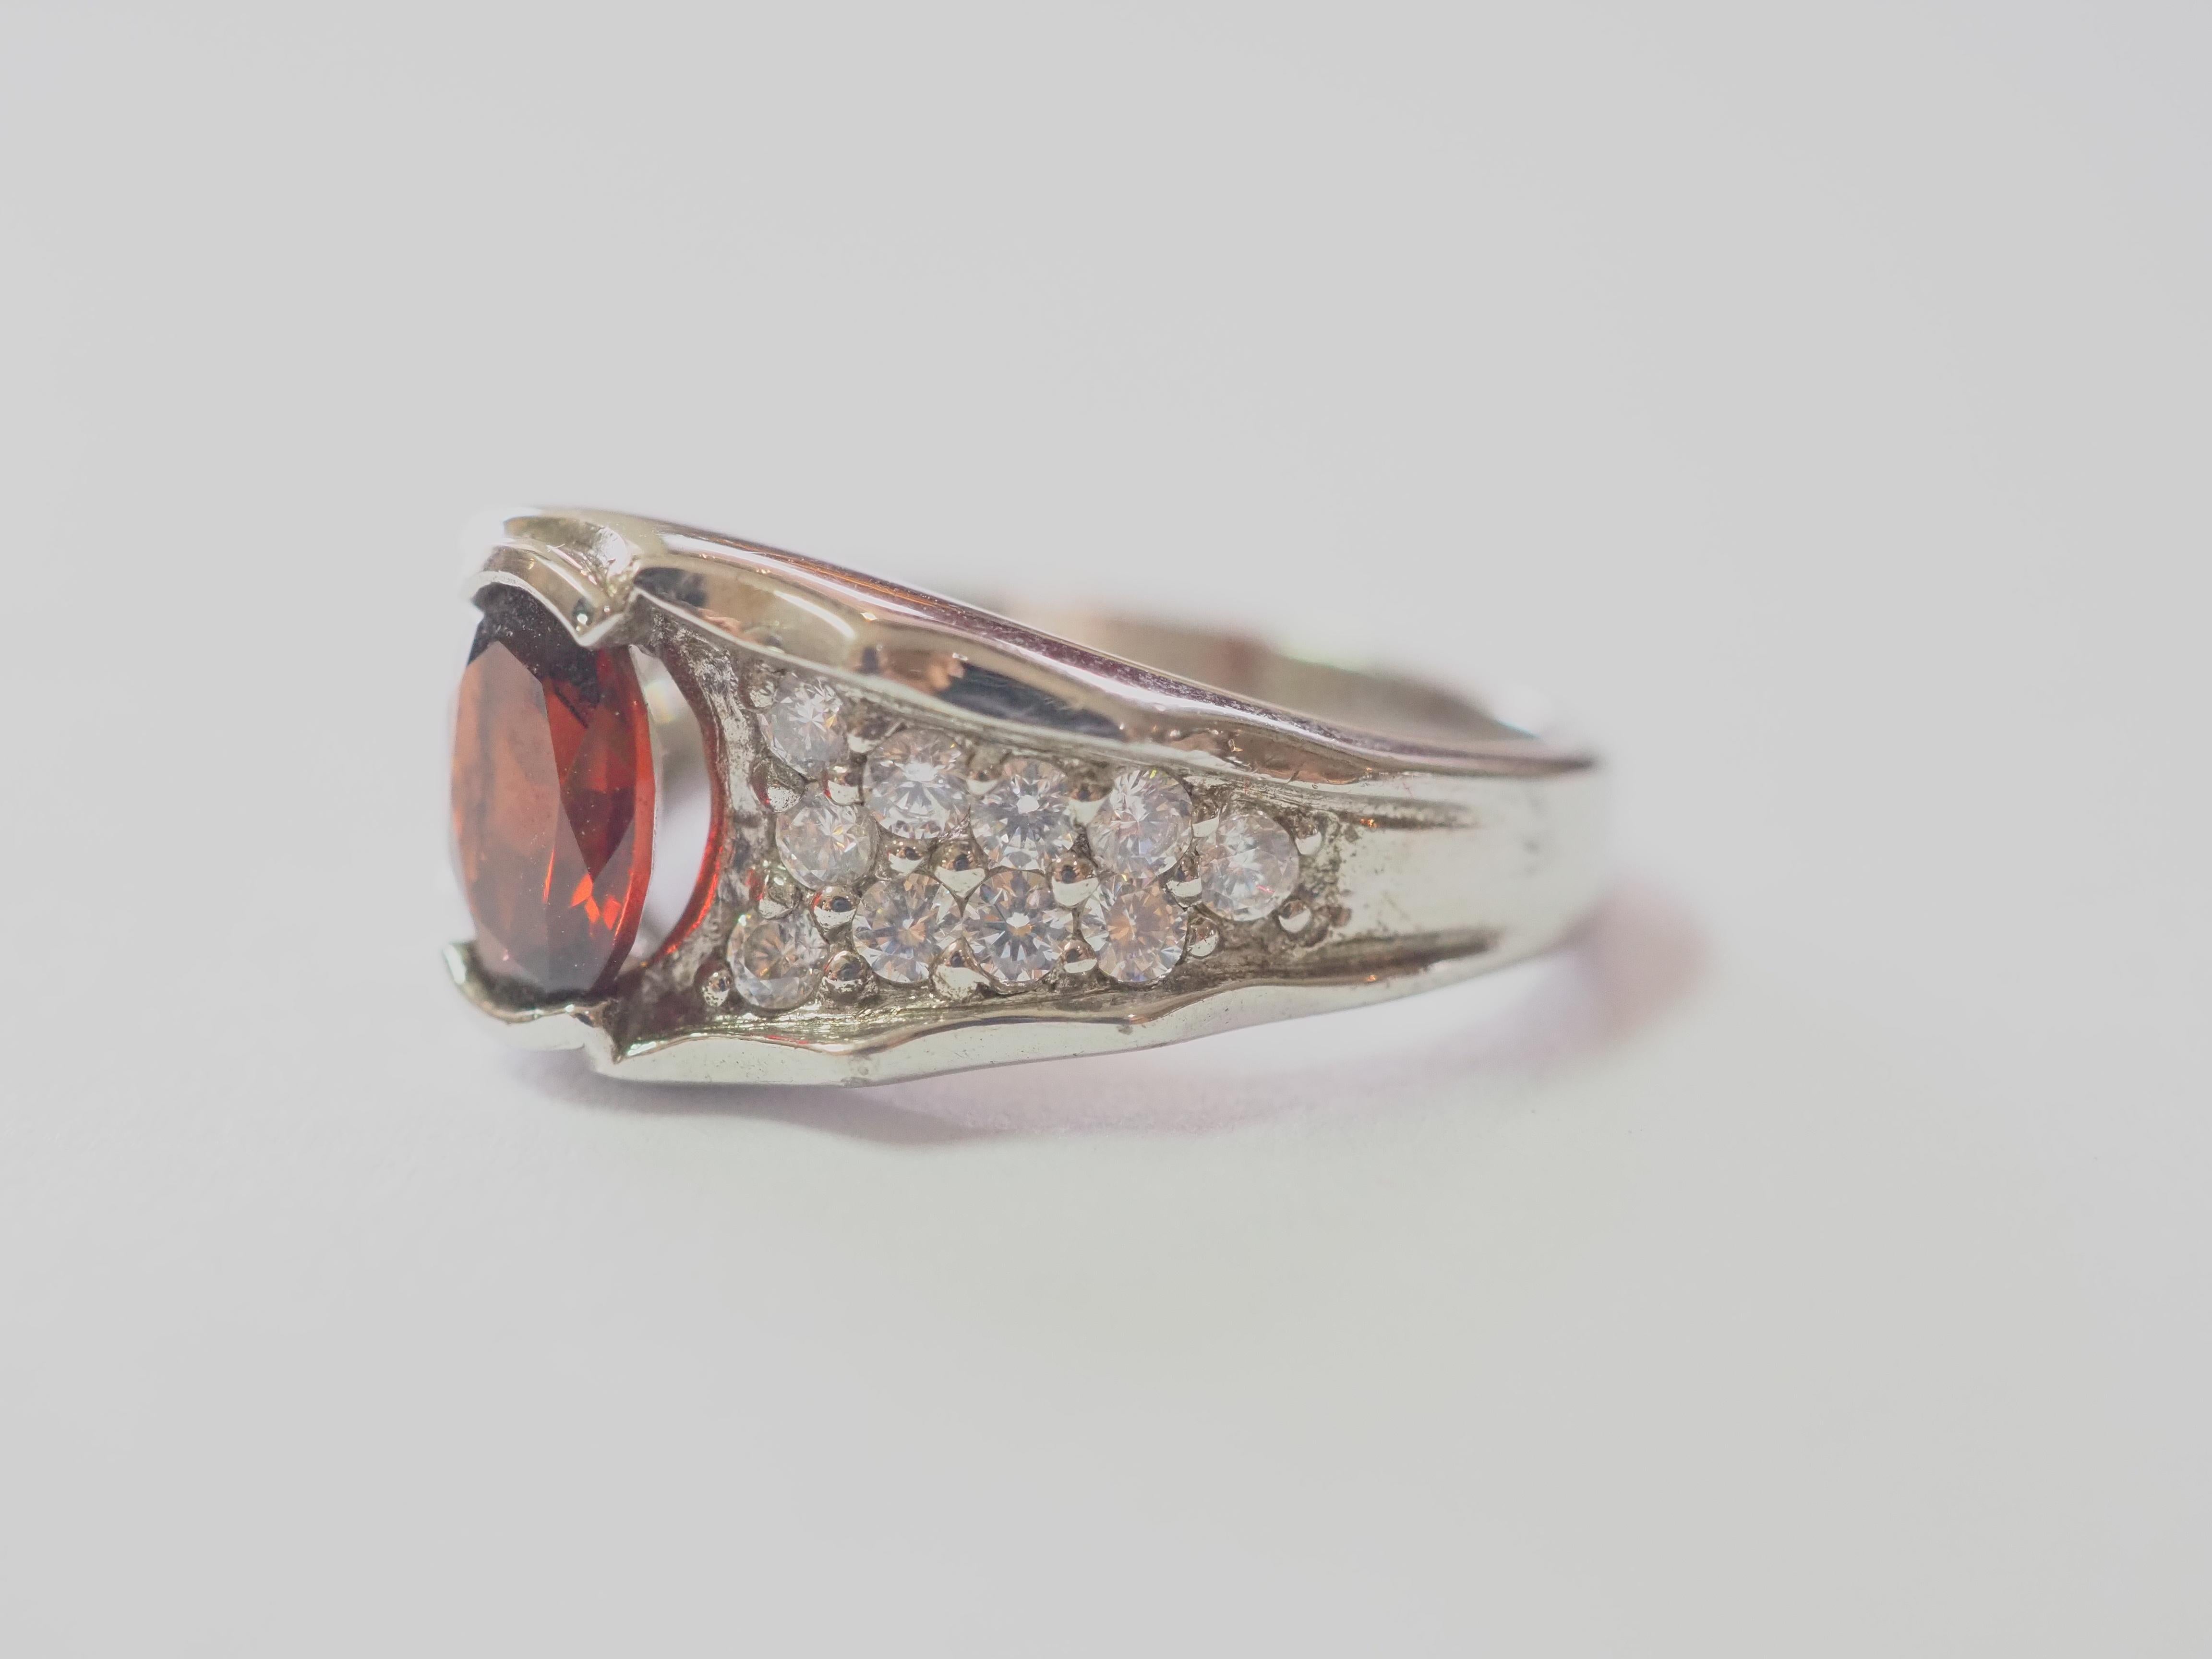 This ring is a beautiful and elegant cocktail ring in solid sterling silver. The ring is decorated by oval garnet channel set in the middle. The brilliant white stones surrounding the red gem are cubic zirconia. The garnet is very widely popular due